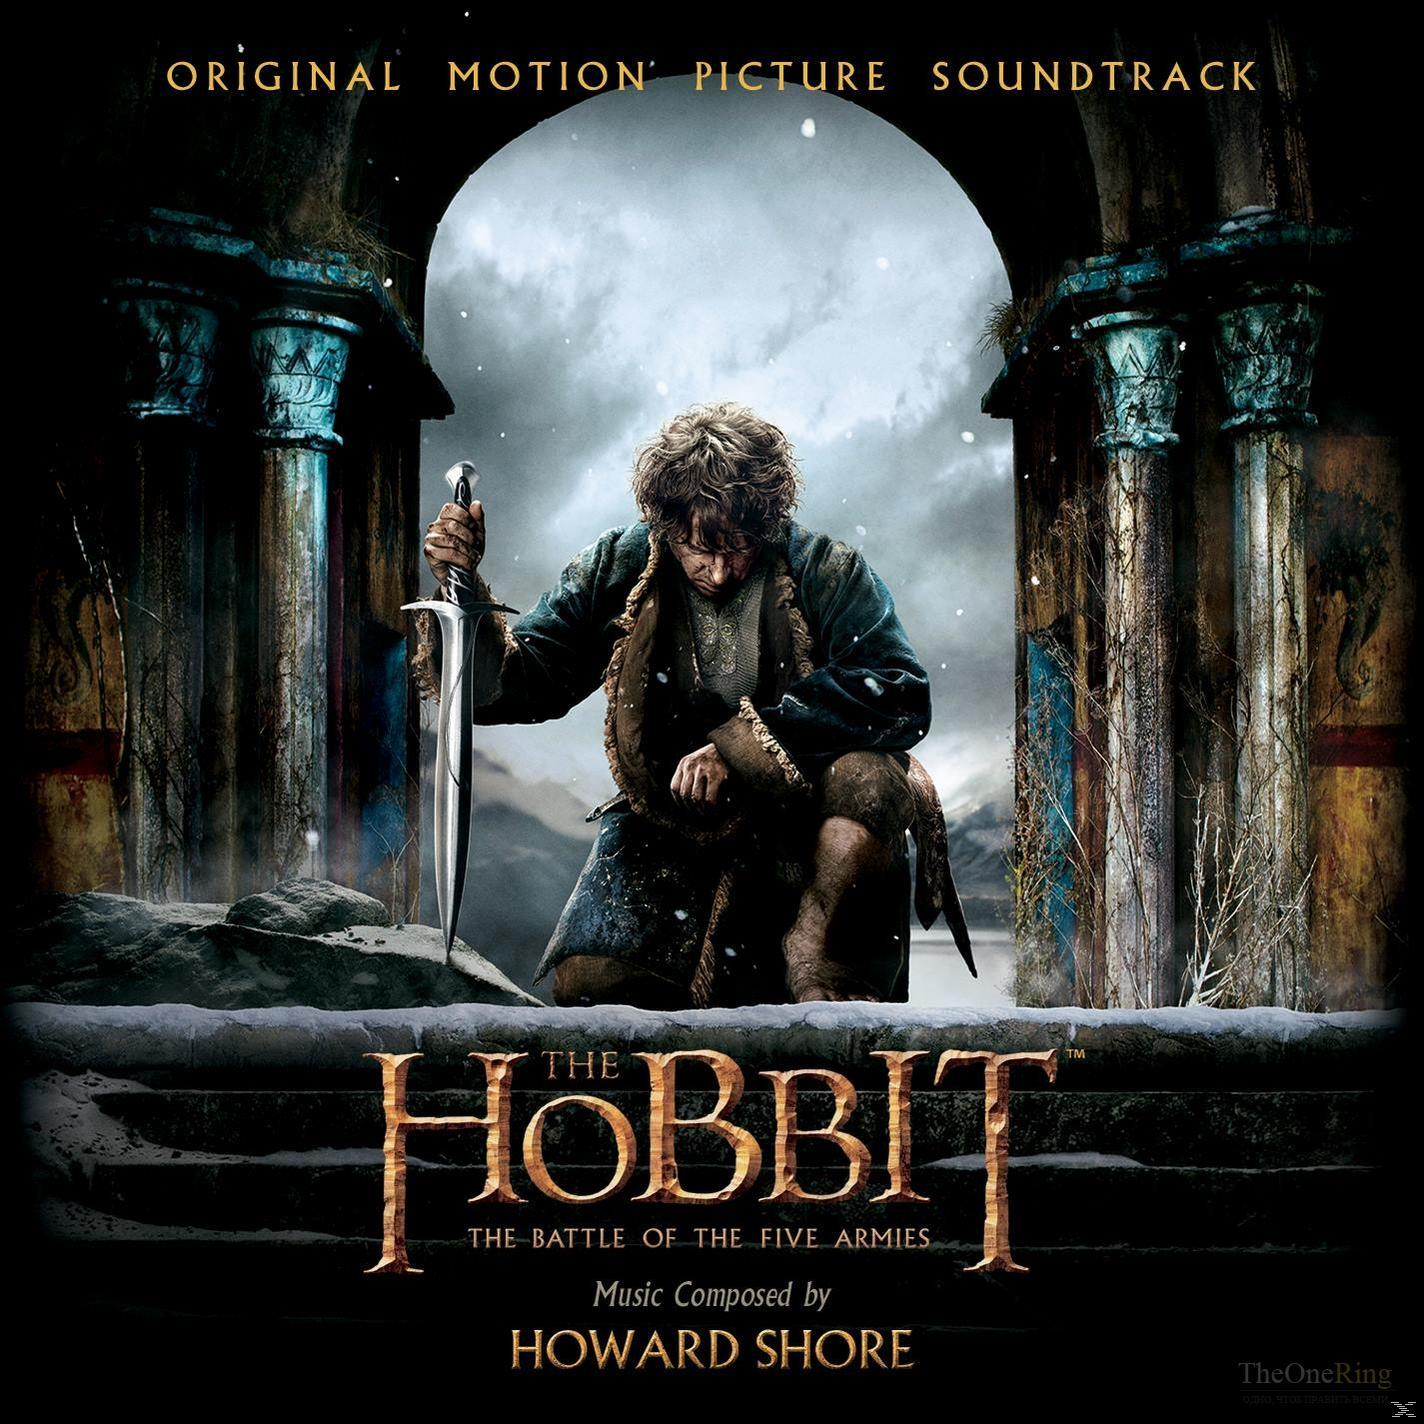 The Hobbit: - The The Shore Howard Of - Battle Armies Five (CD)